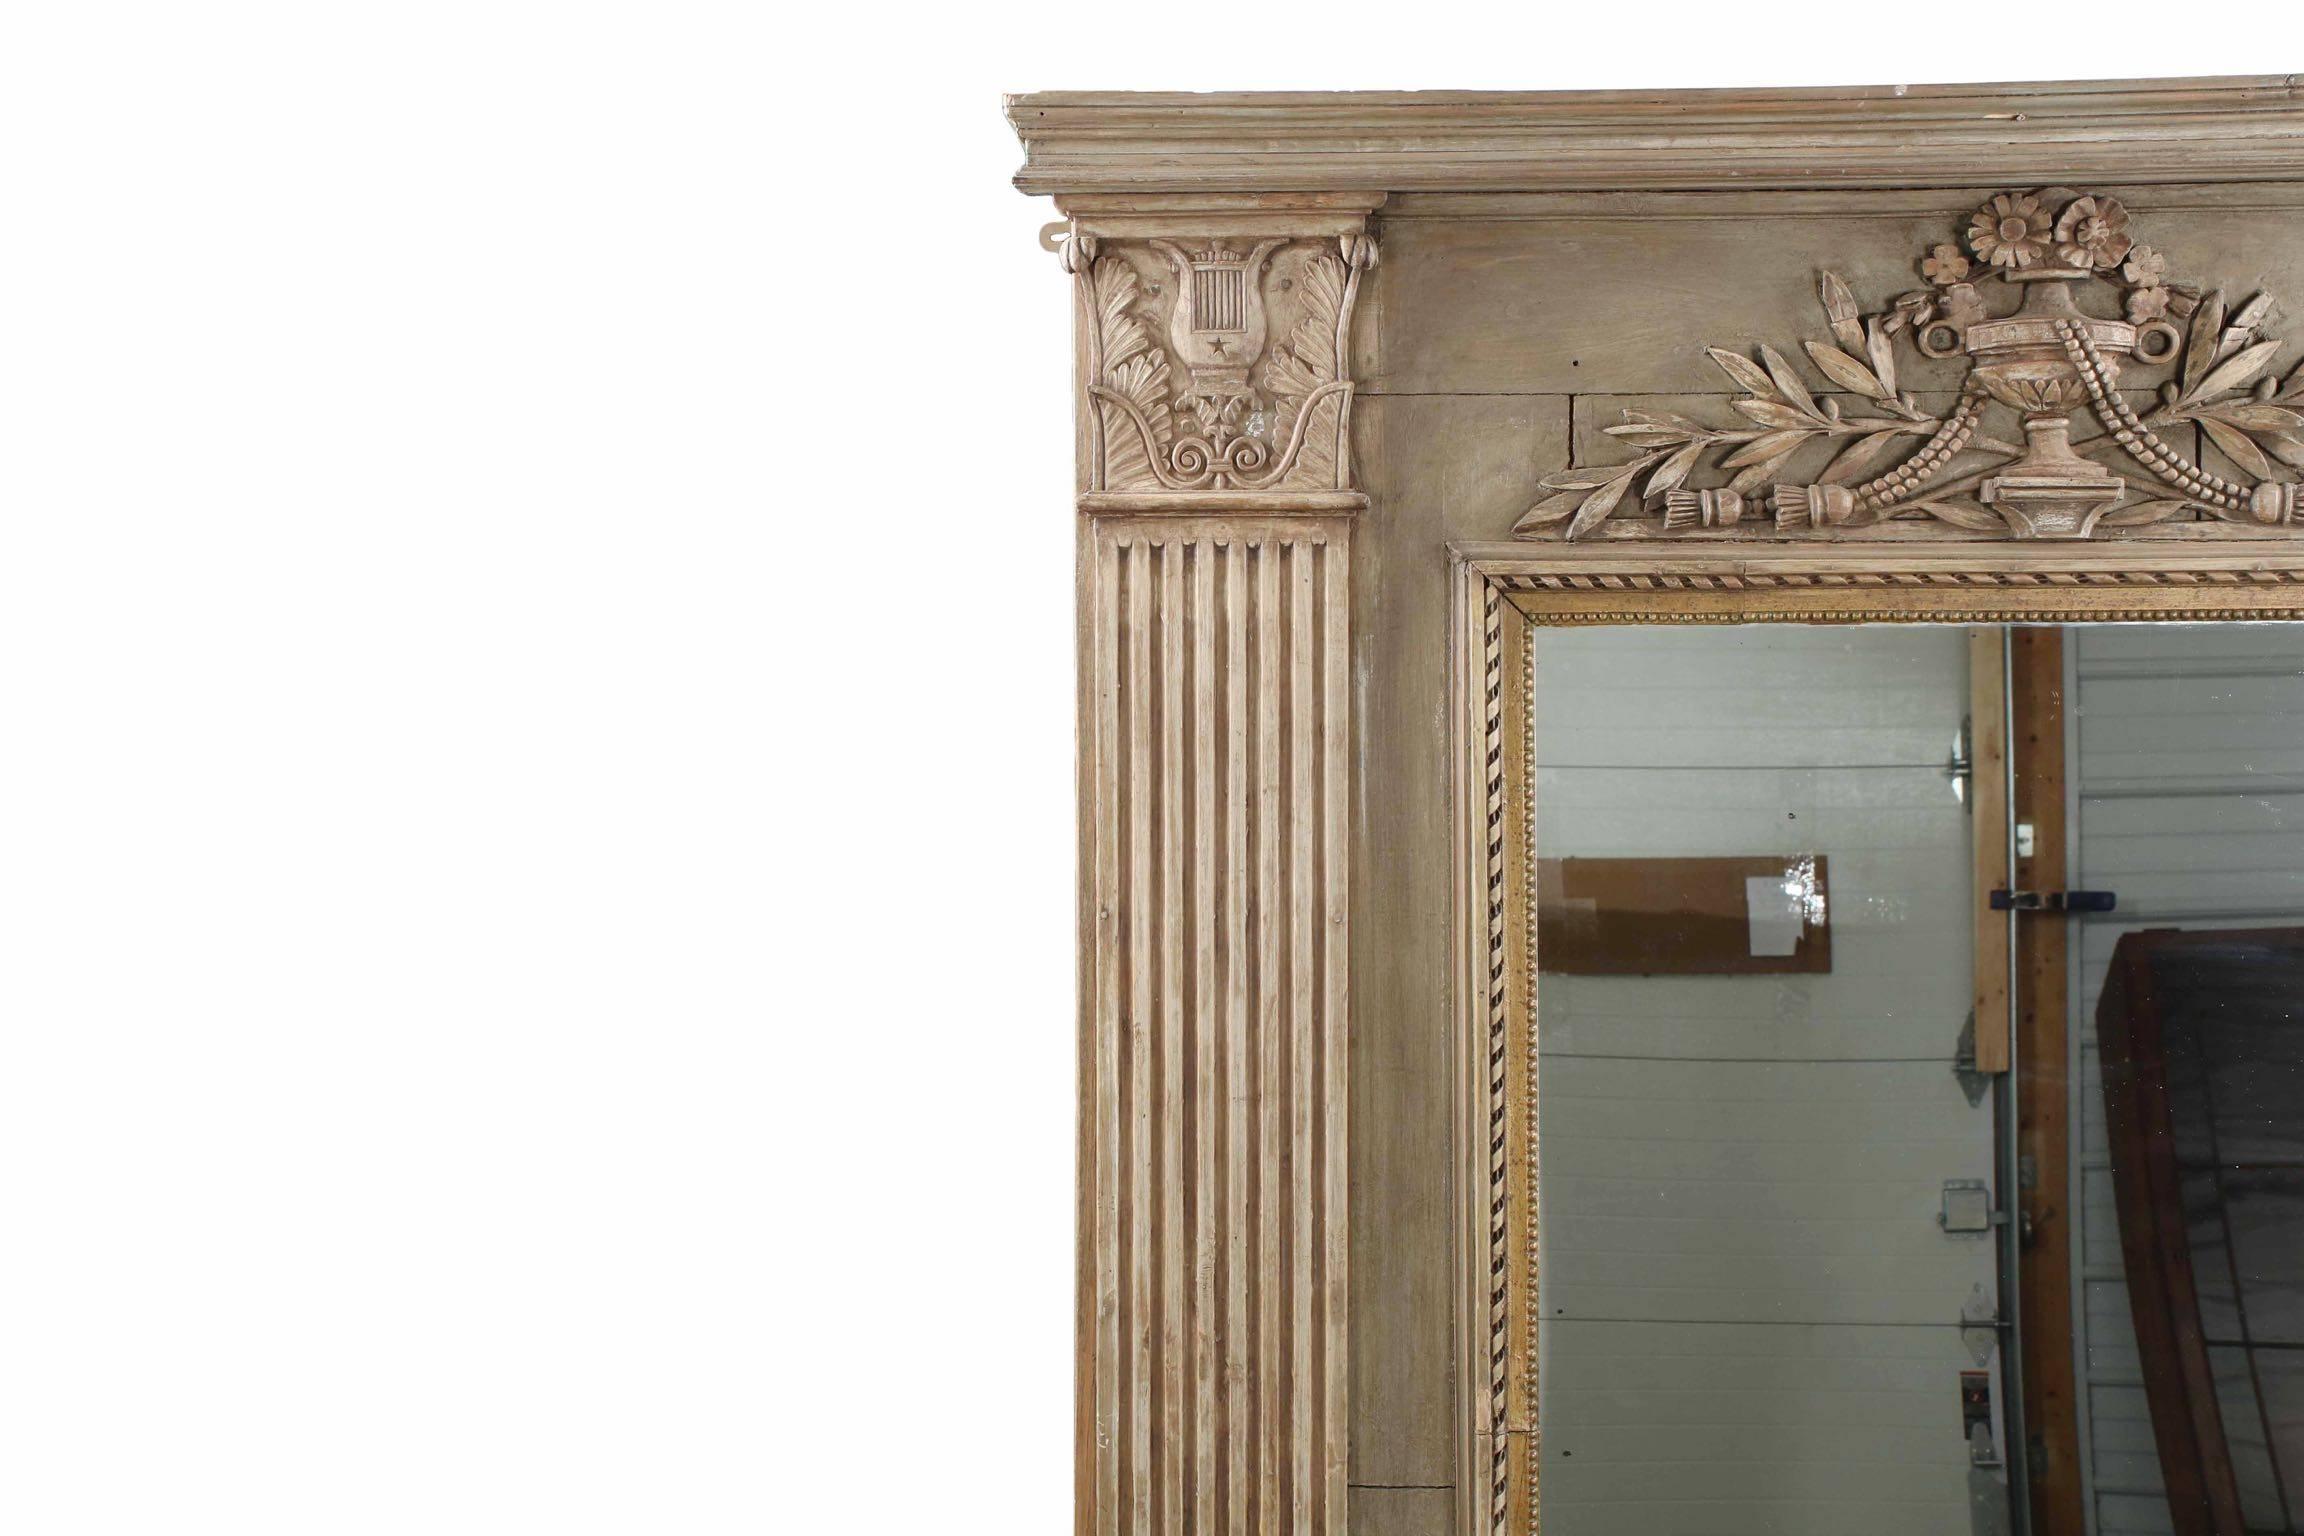 This mirror is a most striking design piece, carefully crafted using old architectural components to lend a natural and authentic surface patina and early classical carvings to the frame. With only a minor projection in the crest, attention is drawn